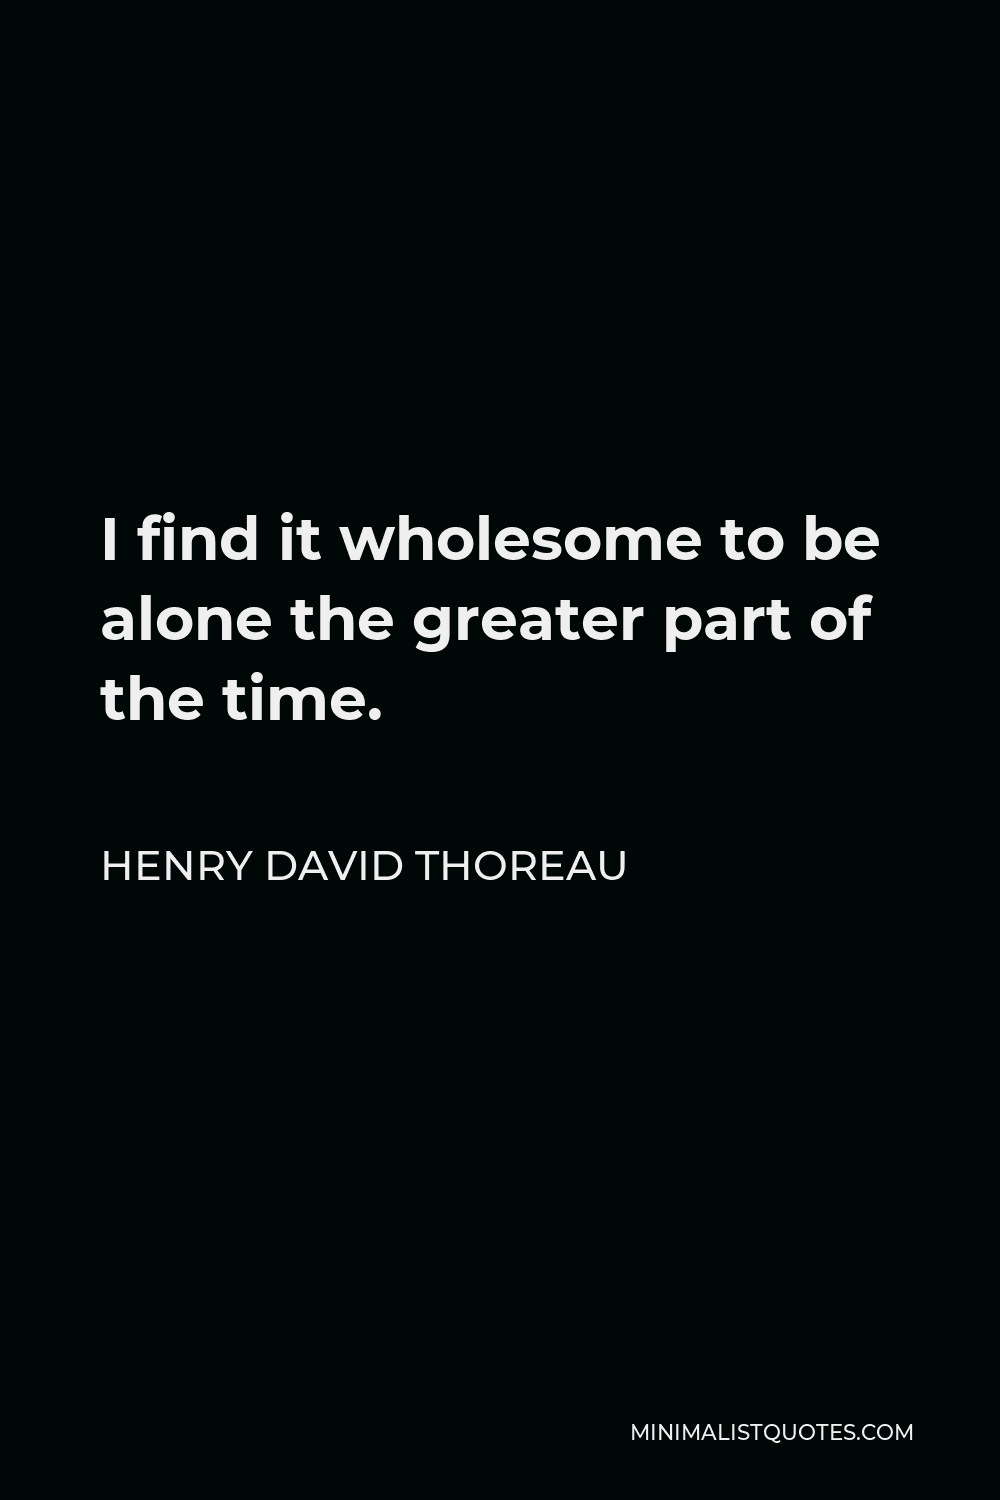 Henry David Thoreau Quote - I find it wholesome to be alone the greater part of the time.